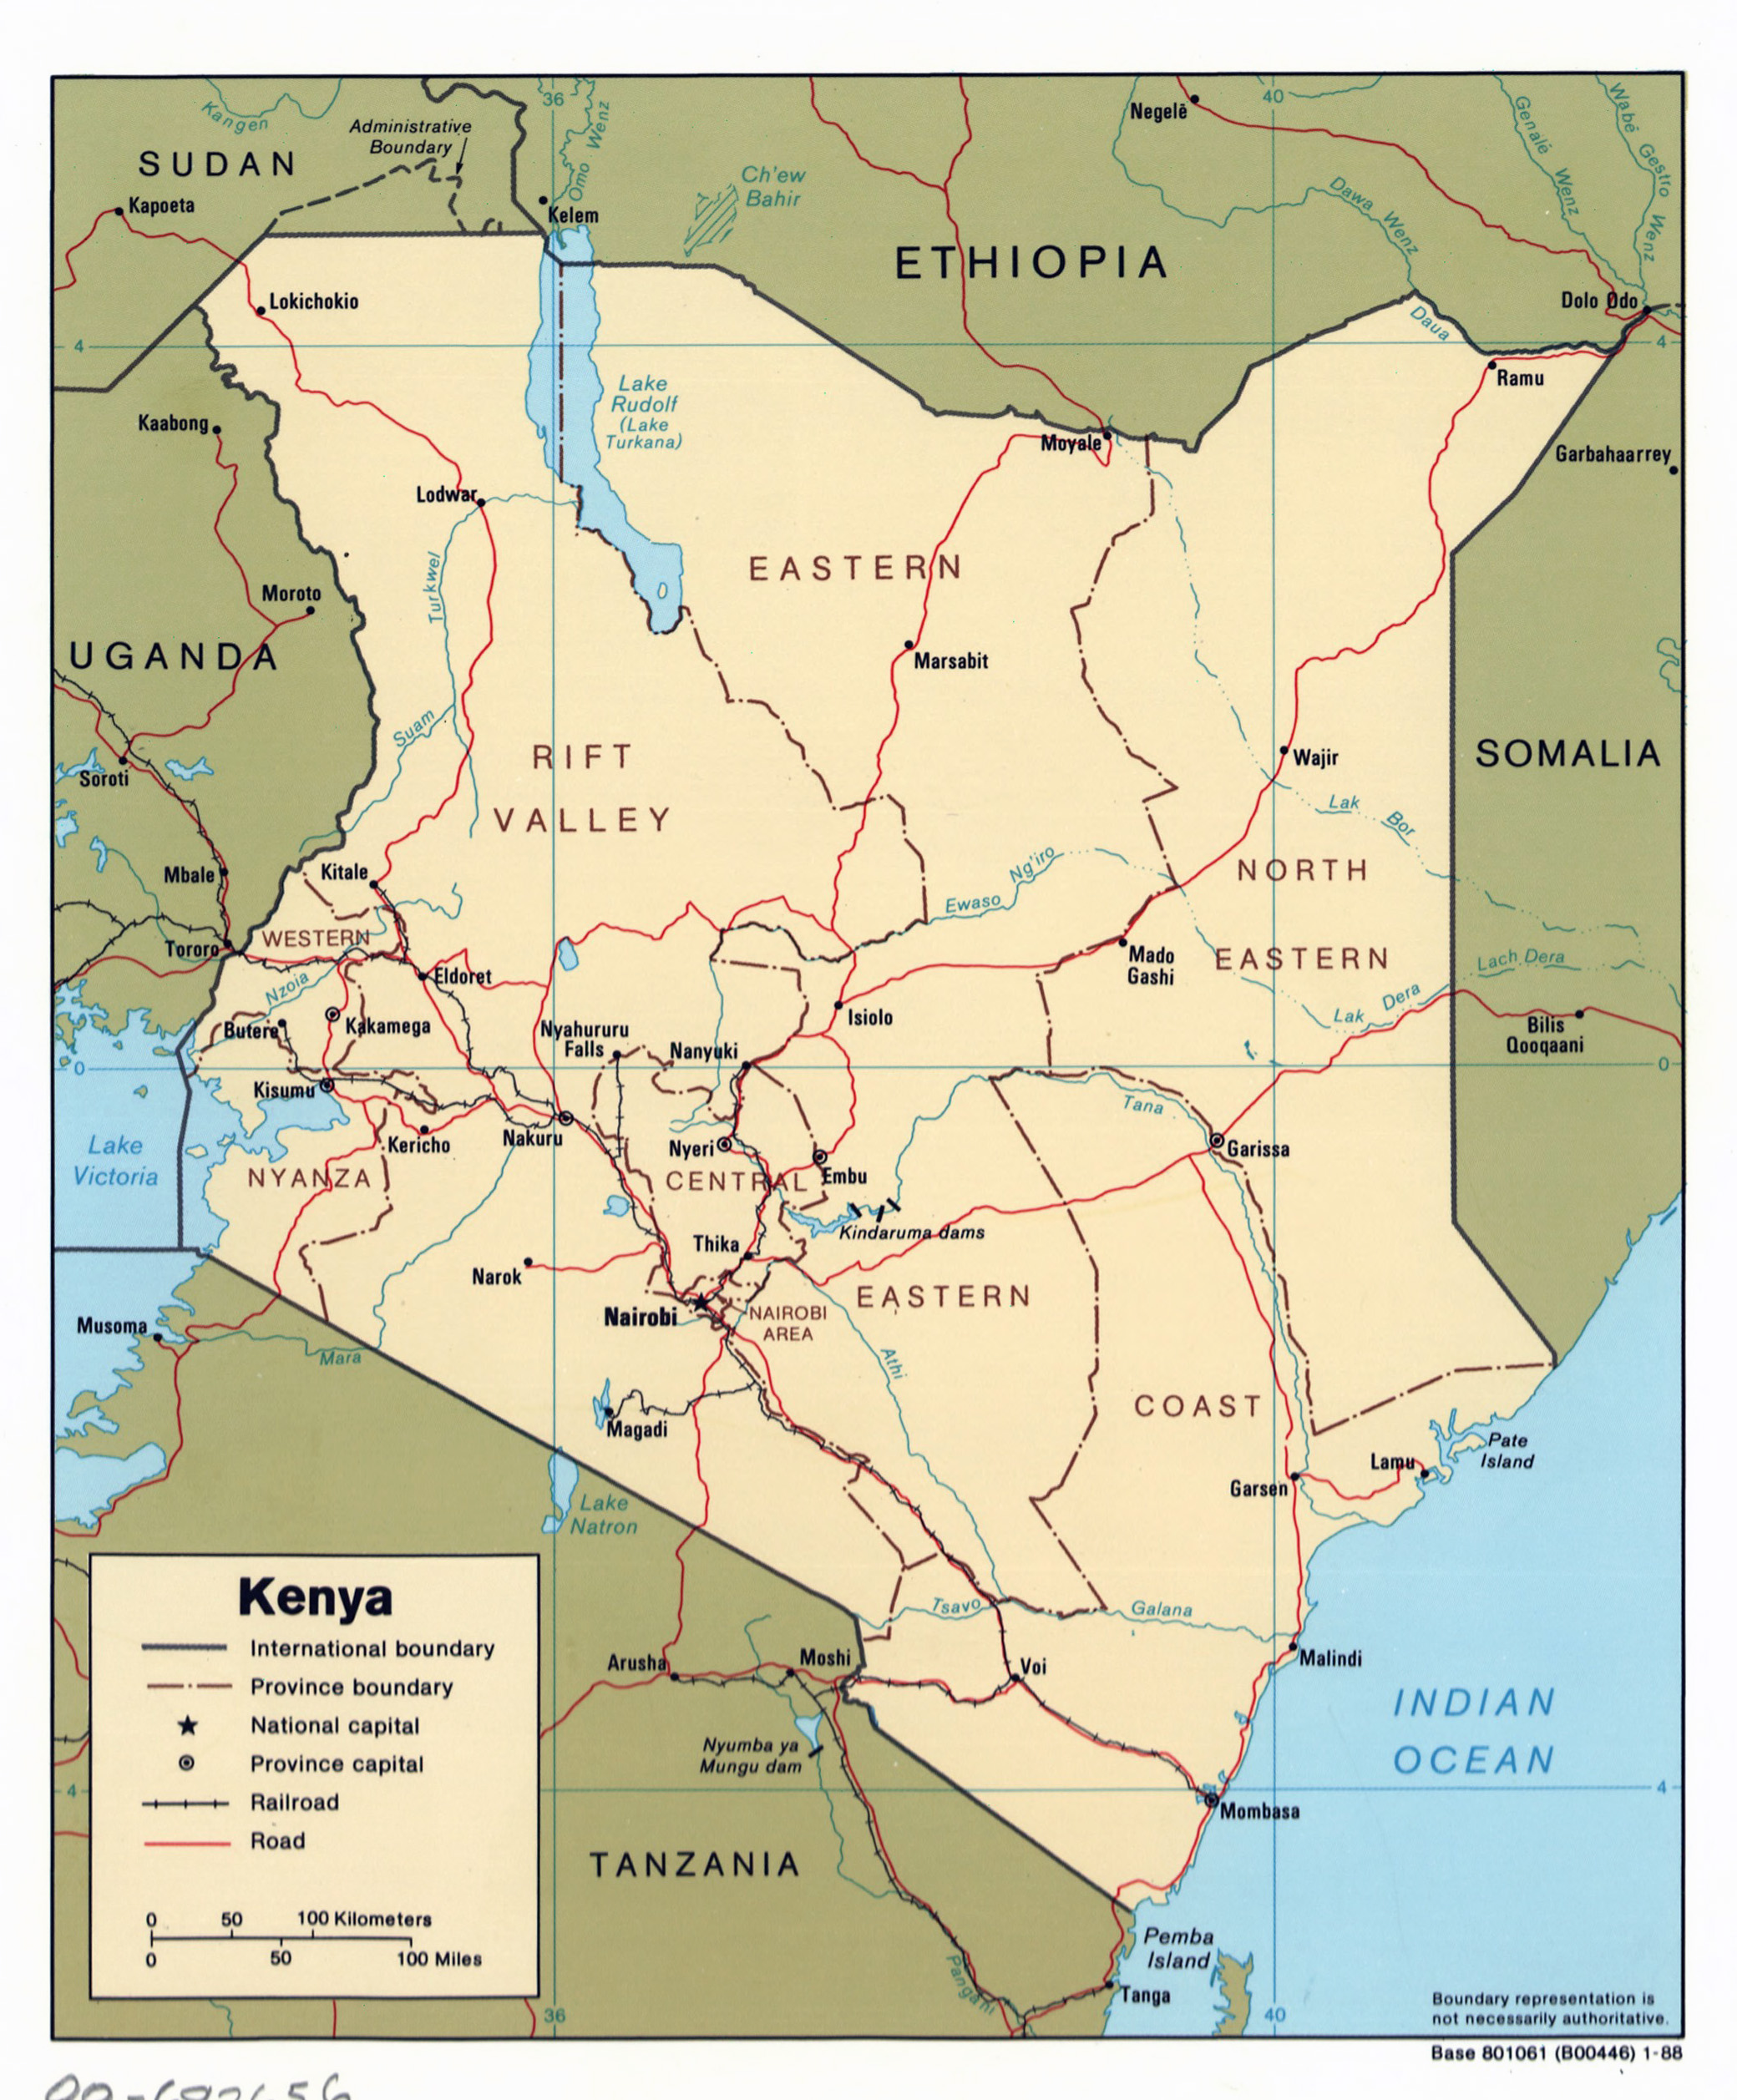 Large Detailed Political And Administrative Map Of Kenya With Roads Railroads And Major Cities 1988 